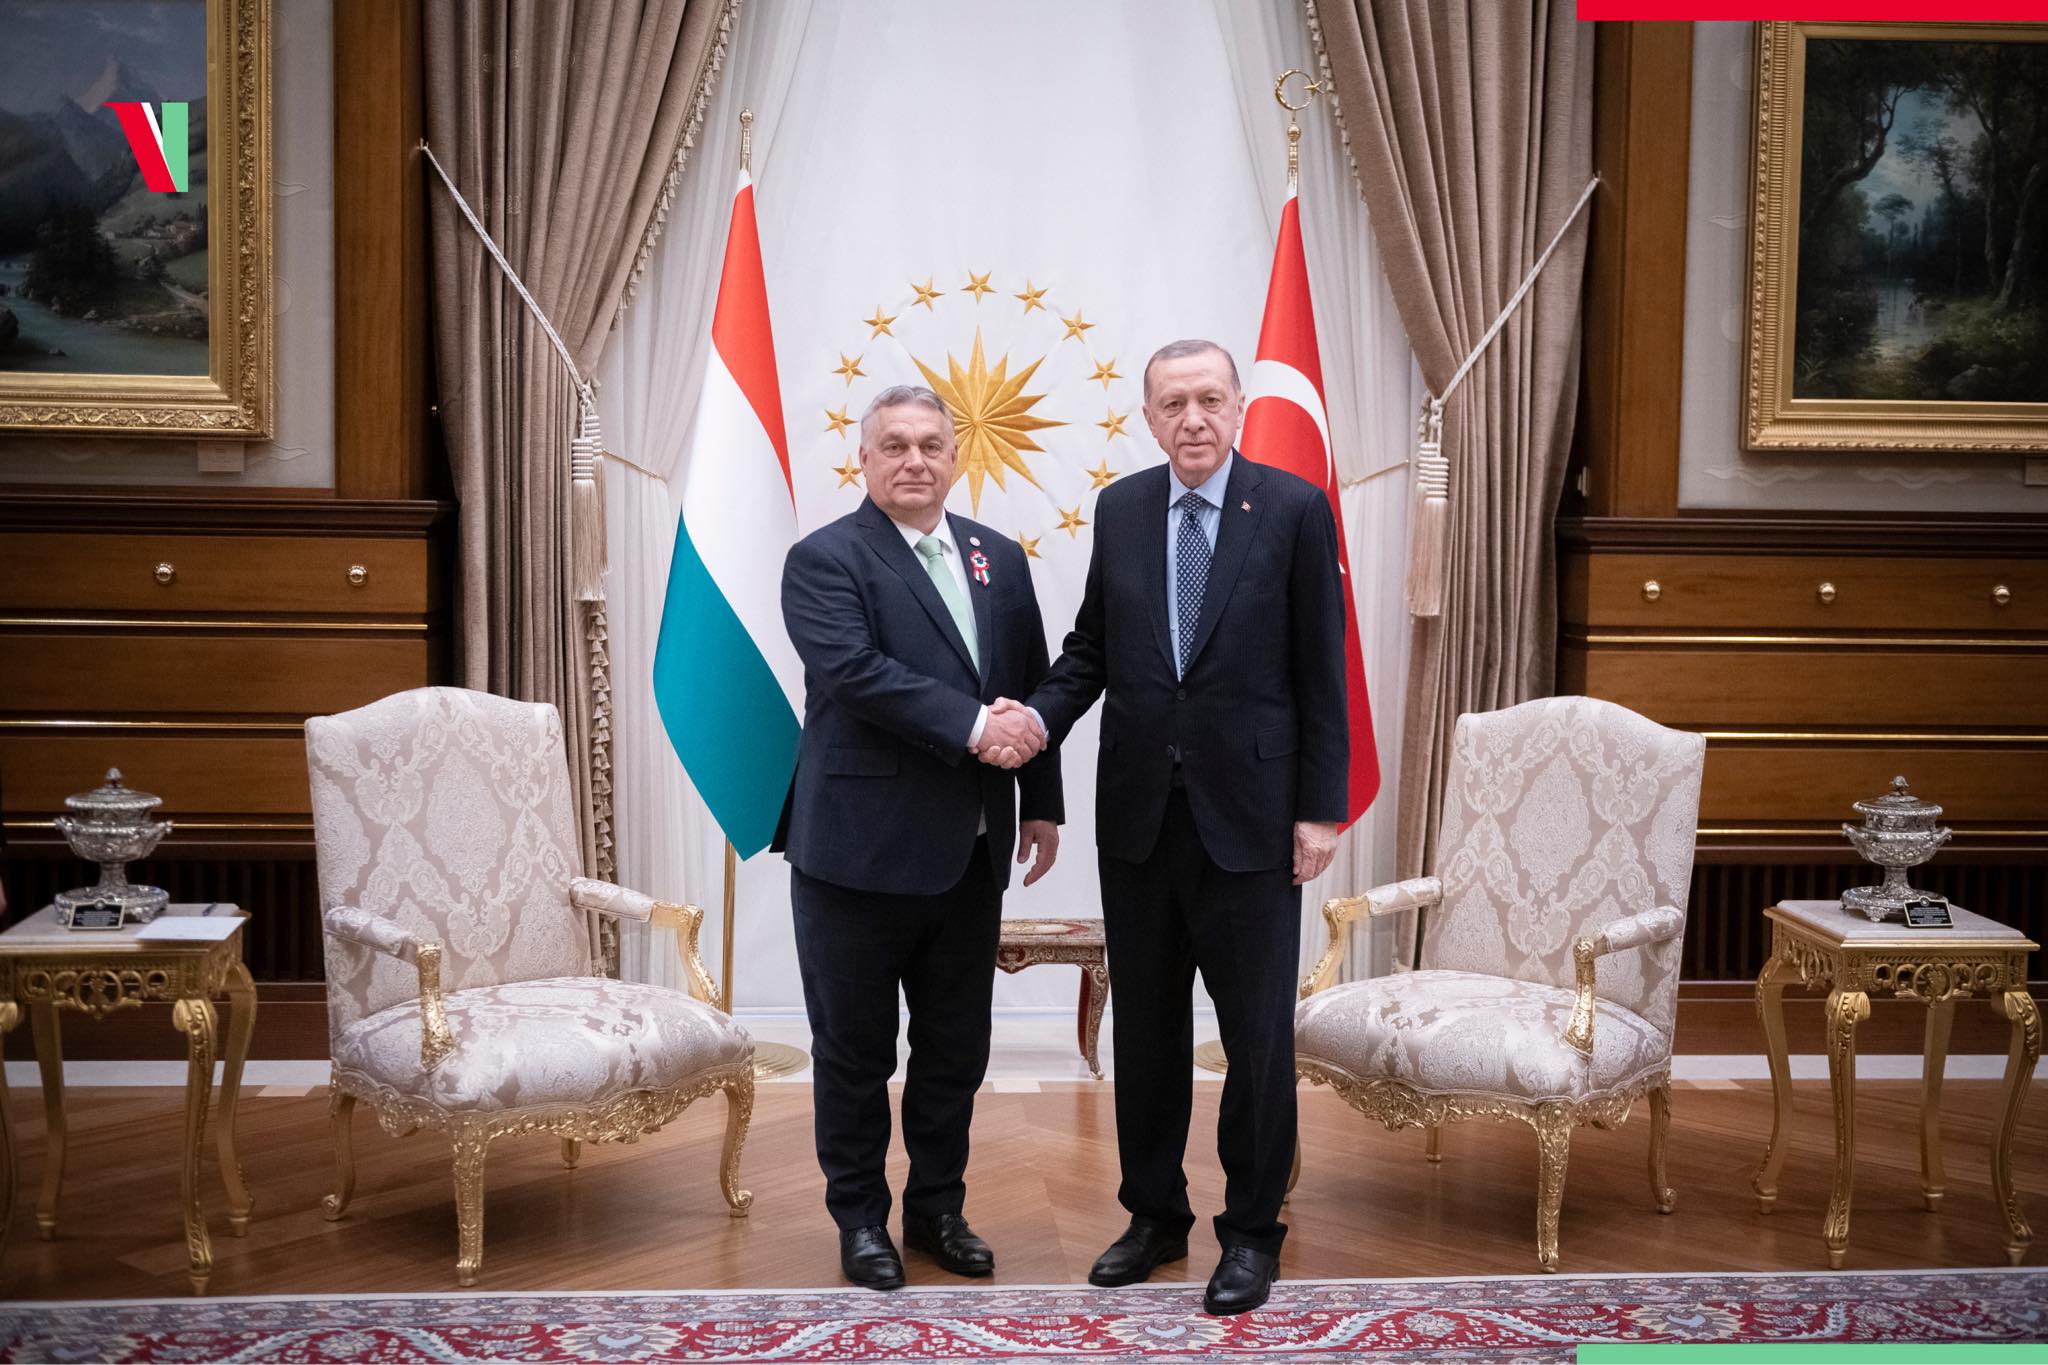 What Did Orbán and Erdogan Just Discuss in Ankara?